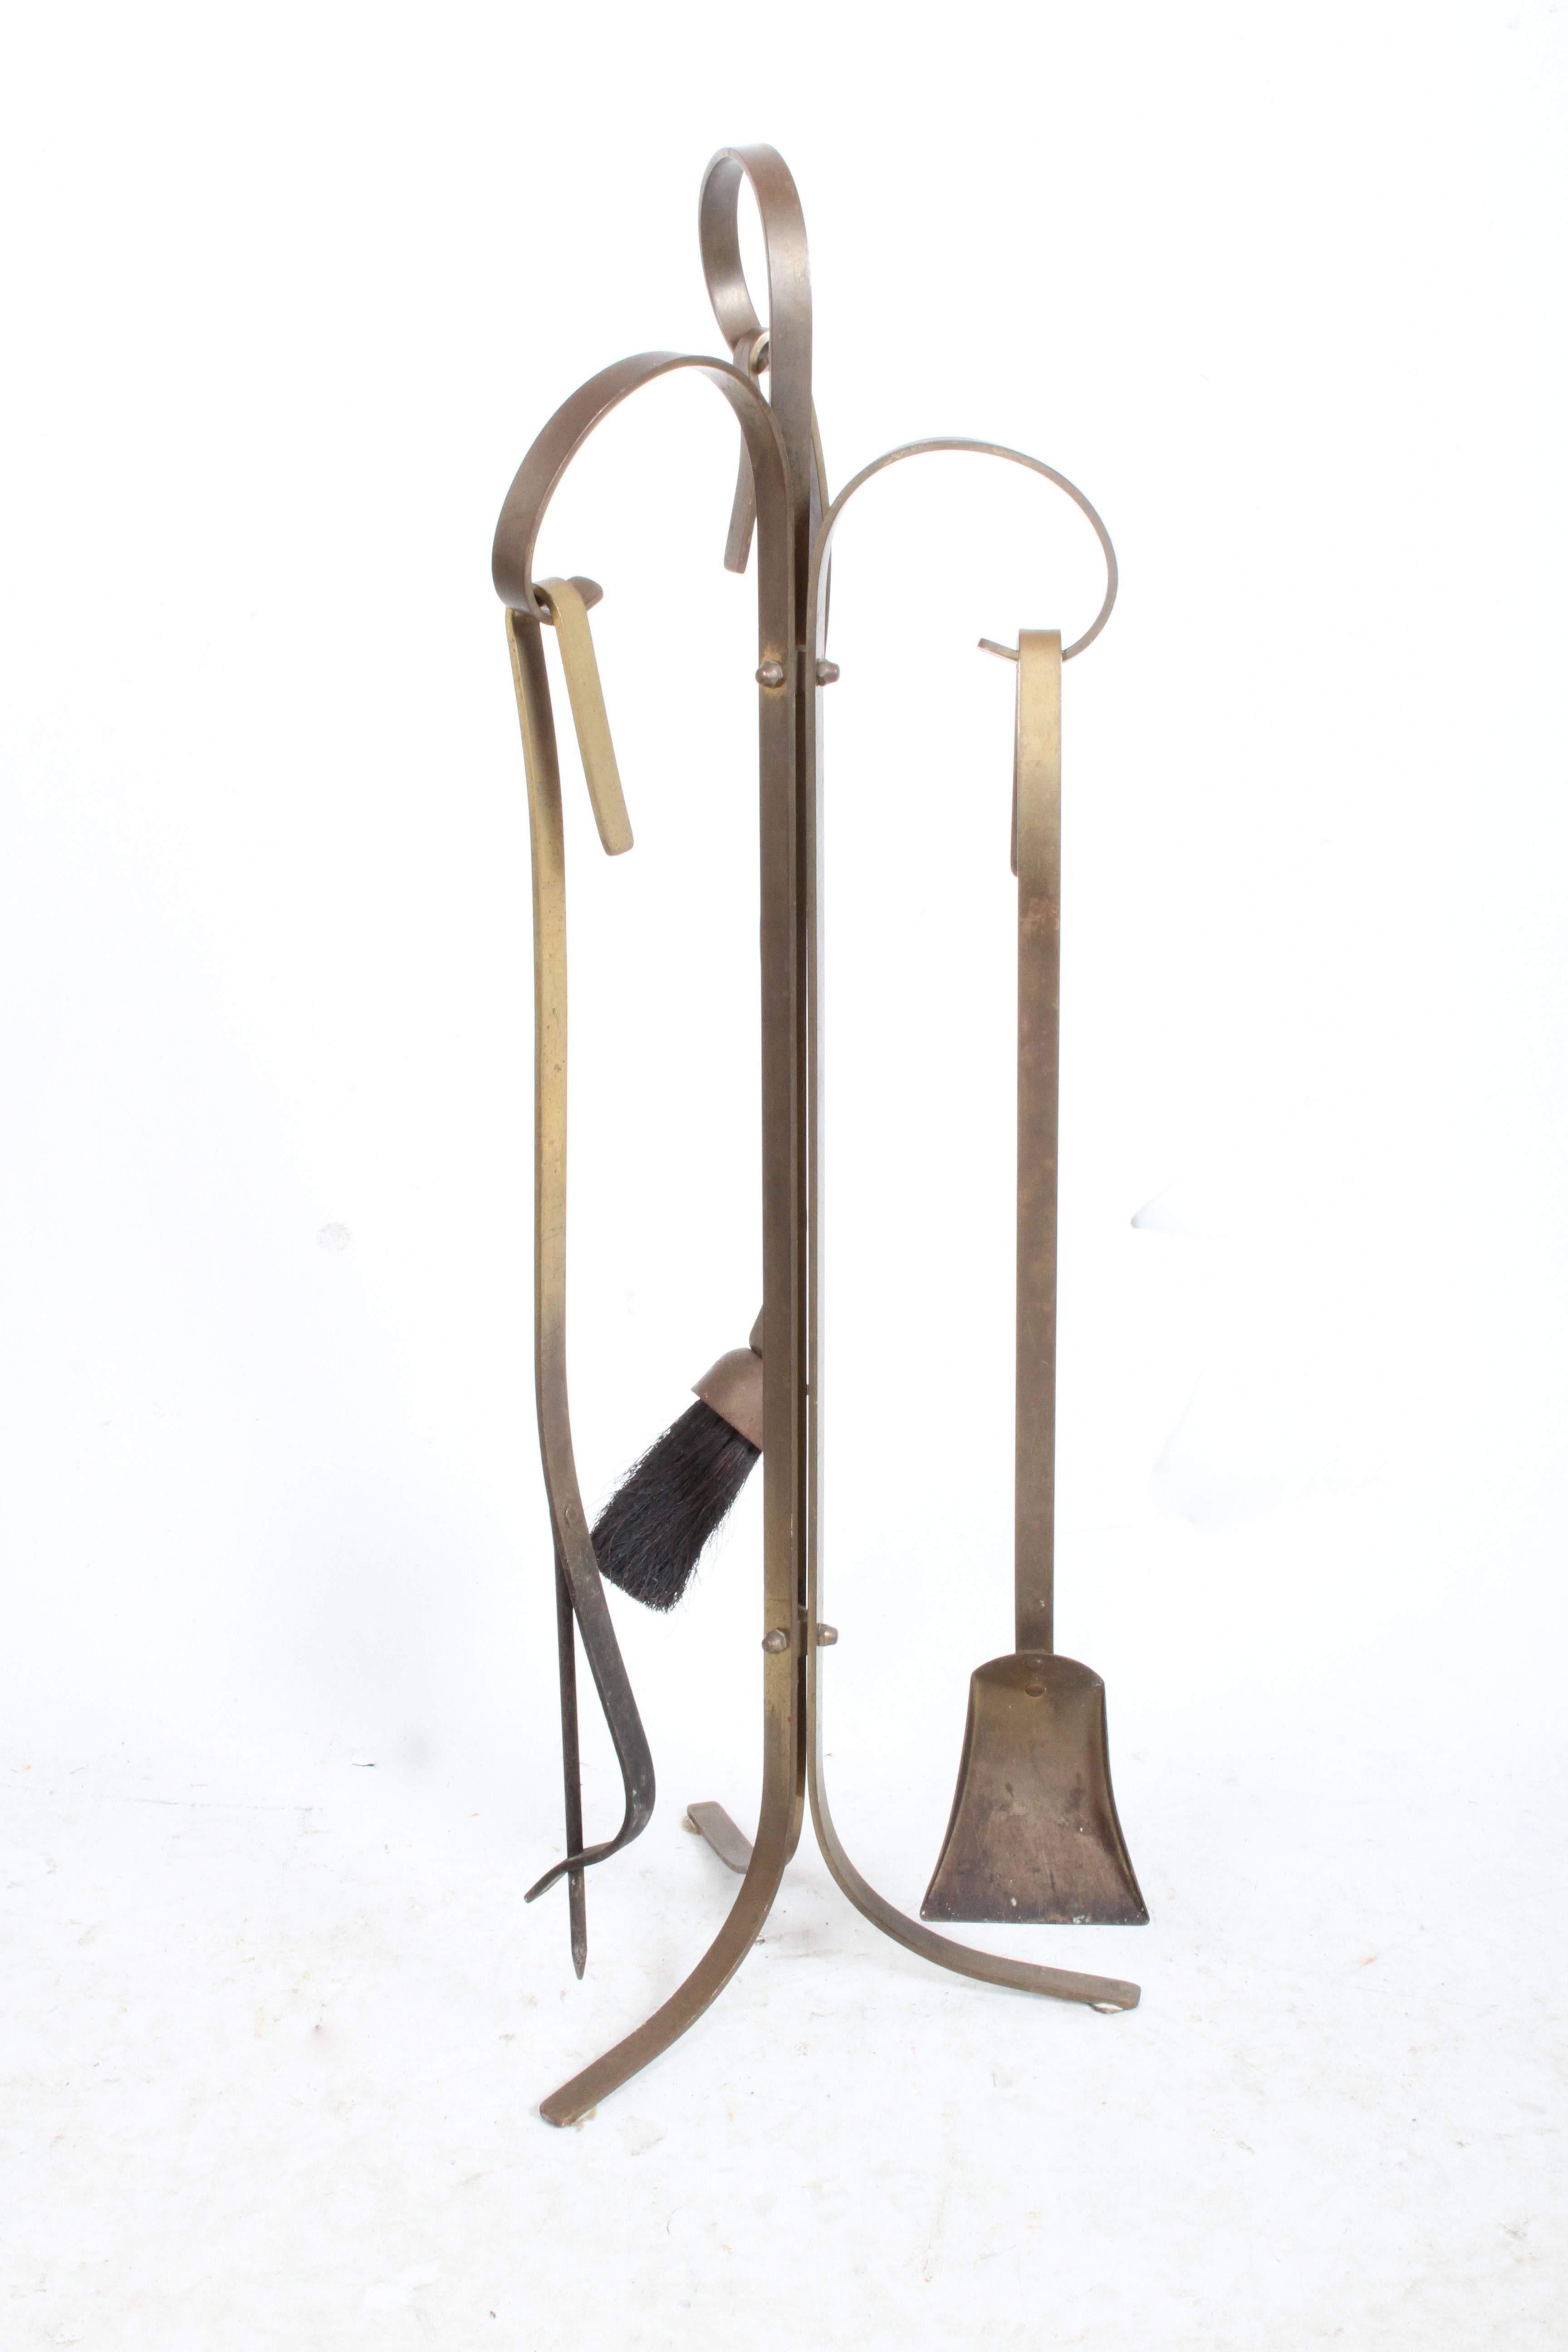 Circa 1950s sculptural brass fire tool set, with original patina. Can be polish polished for additional cost.  Set Includes Fire tools , Andirons and log holder. 

Tools 35.5 h x 12dia 
Andirons 16h x 7w x 9.5d each
Log holder 20.5 l x 14w x 6